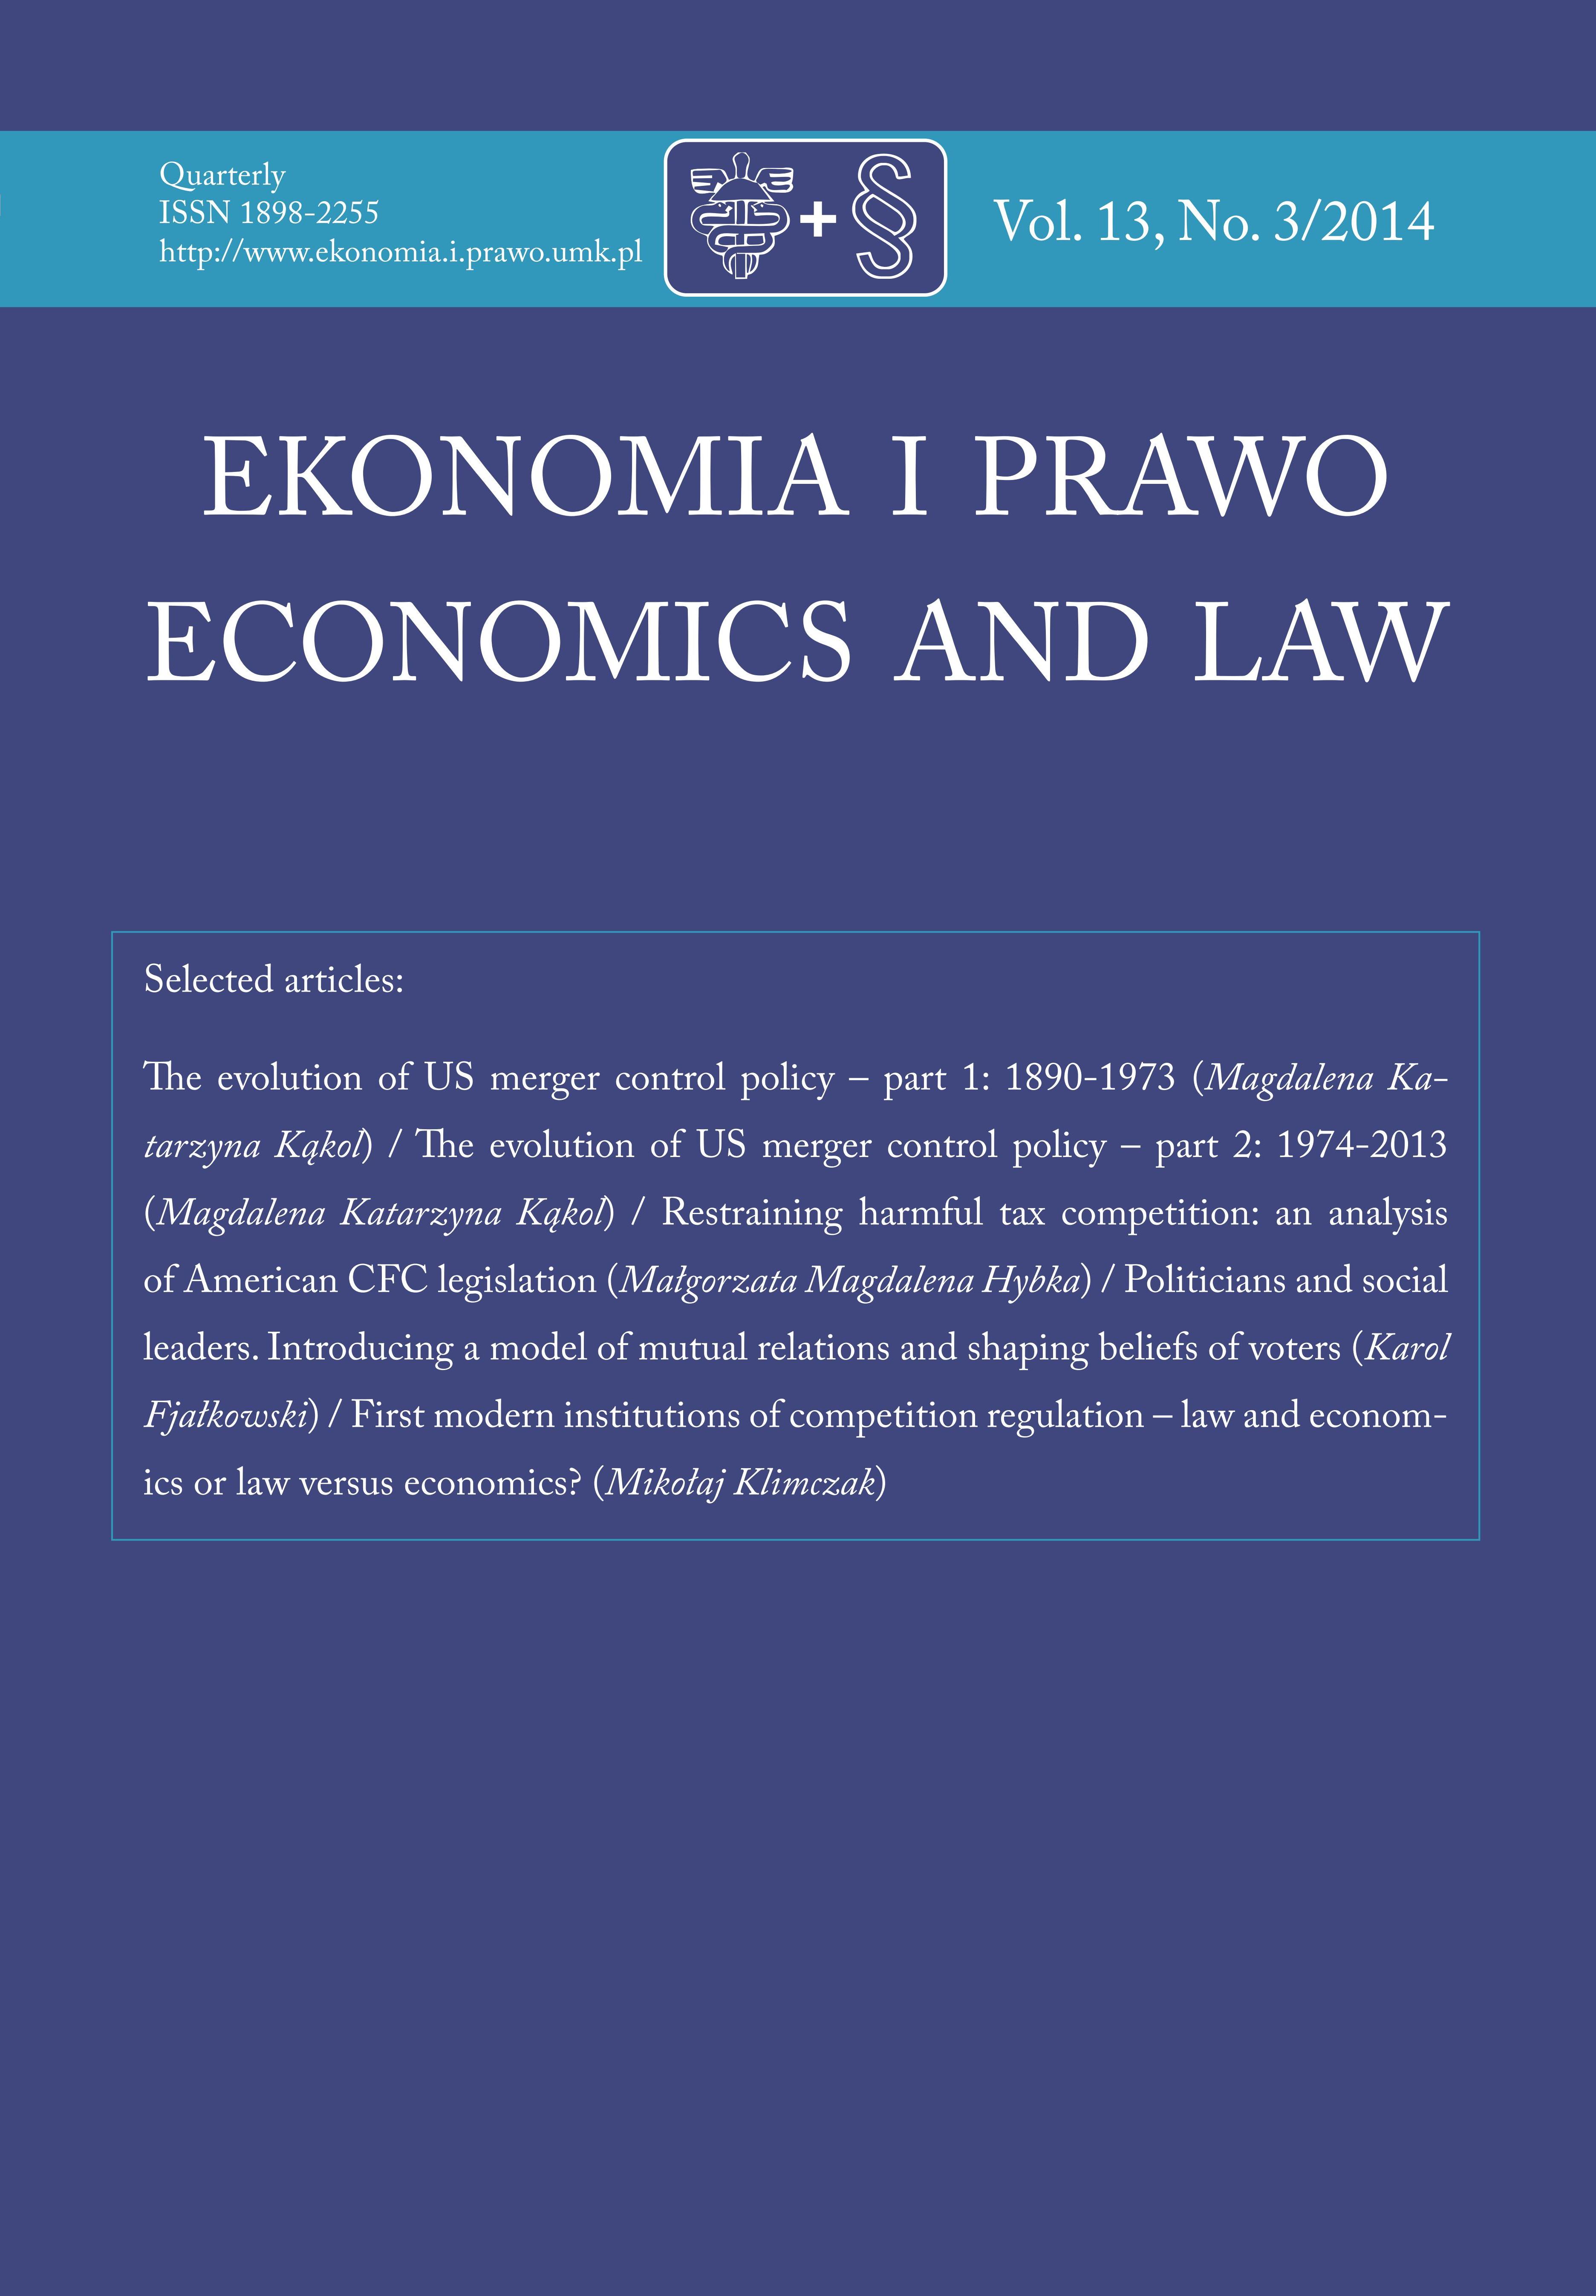 FIRST MODERN INSTITUTIONS OF COMPETITION REGULATION – LAW AND ECONOMICS OR LAW VERSUS ECONOMICS? Cover Image